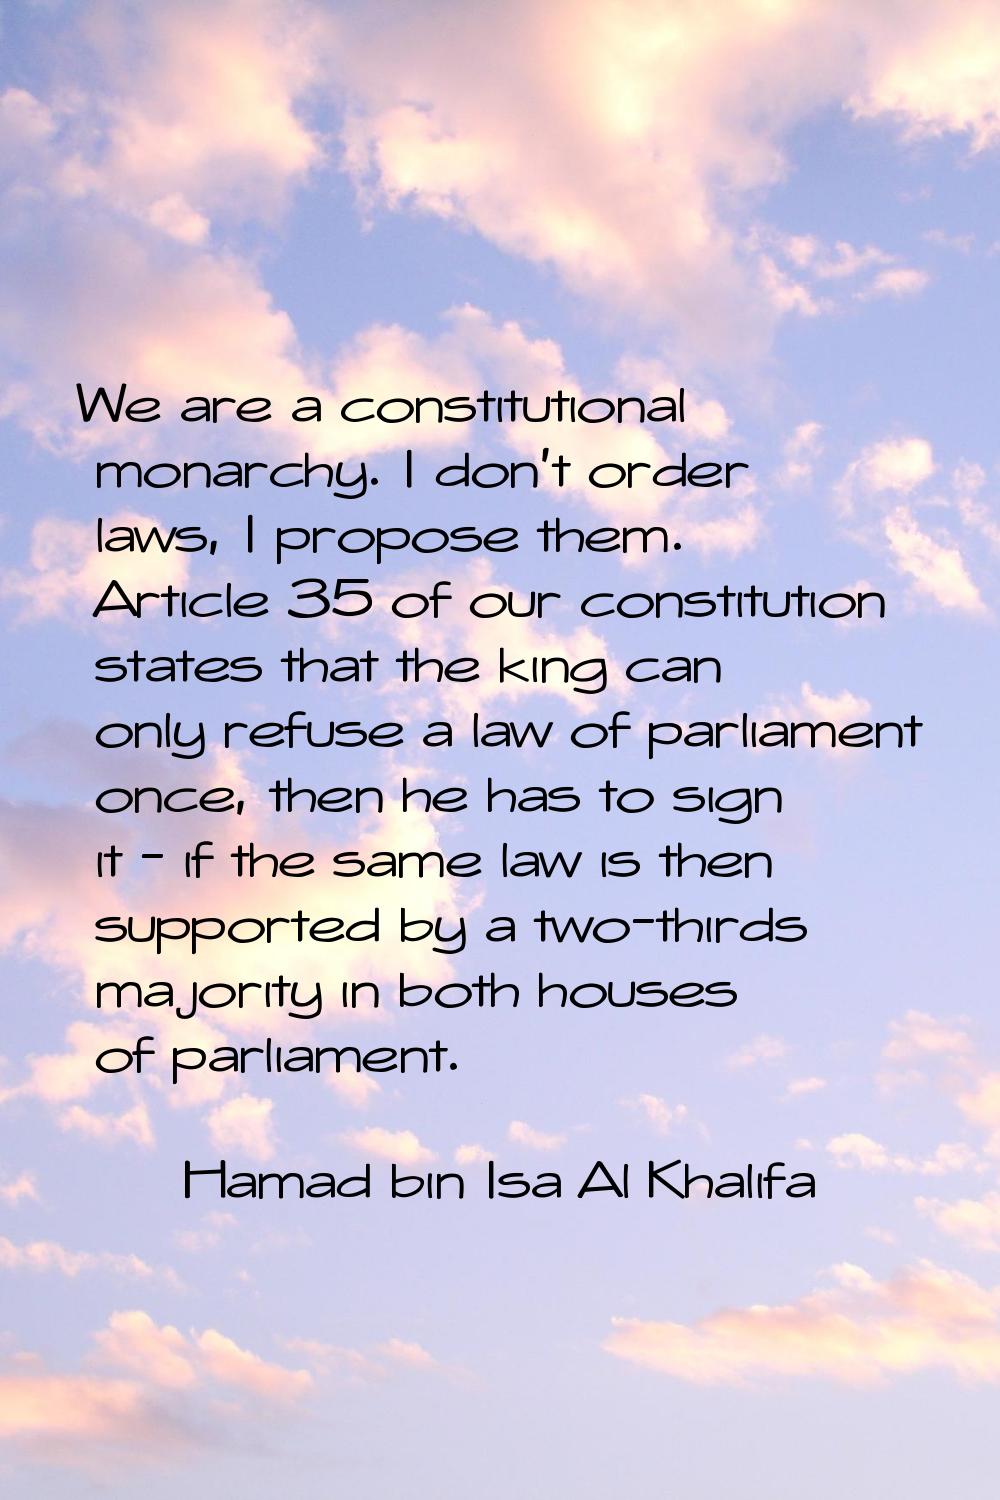 We are a constitutional monarchy. I don't order laws, I propose them. Article 35 of our constitutio